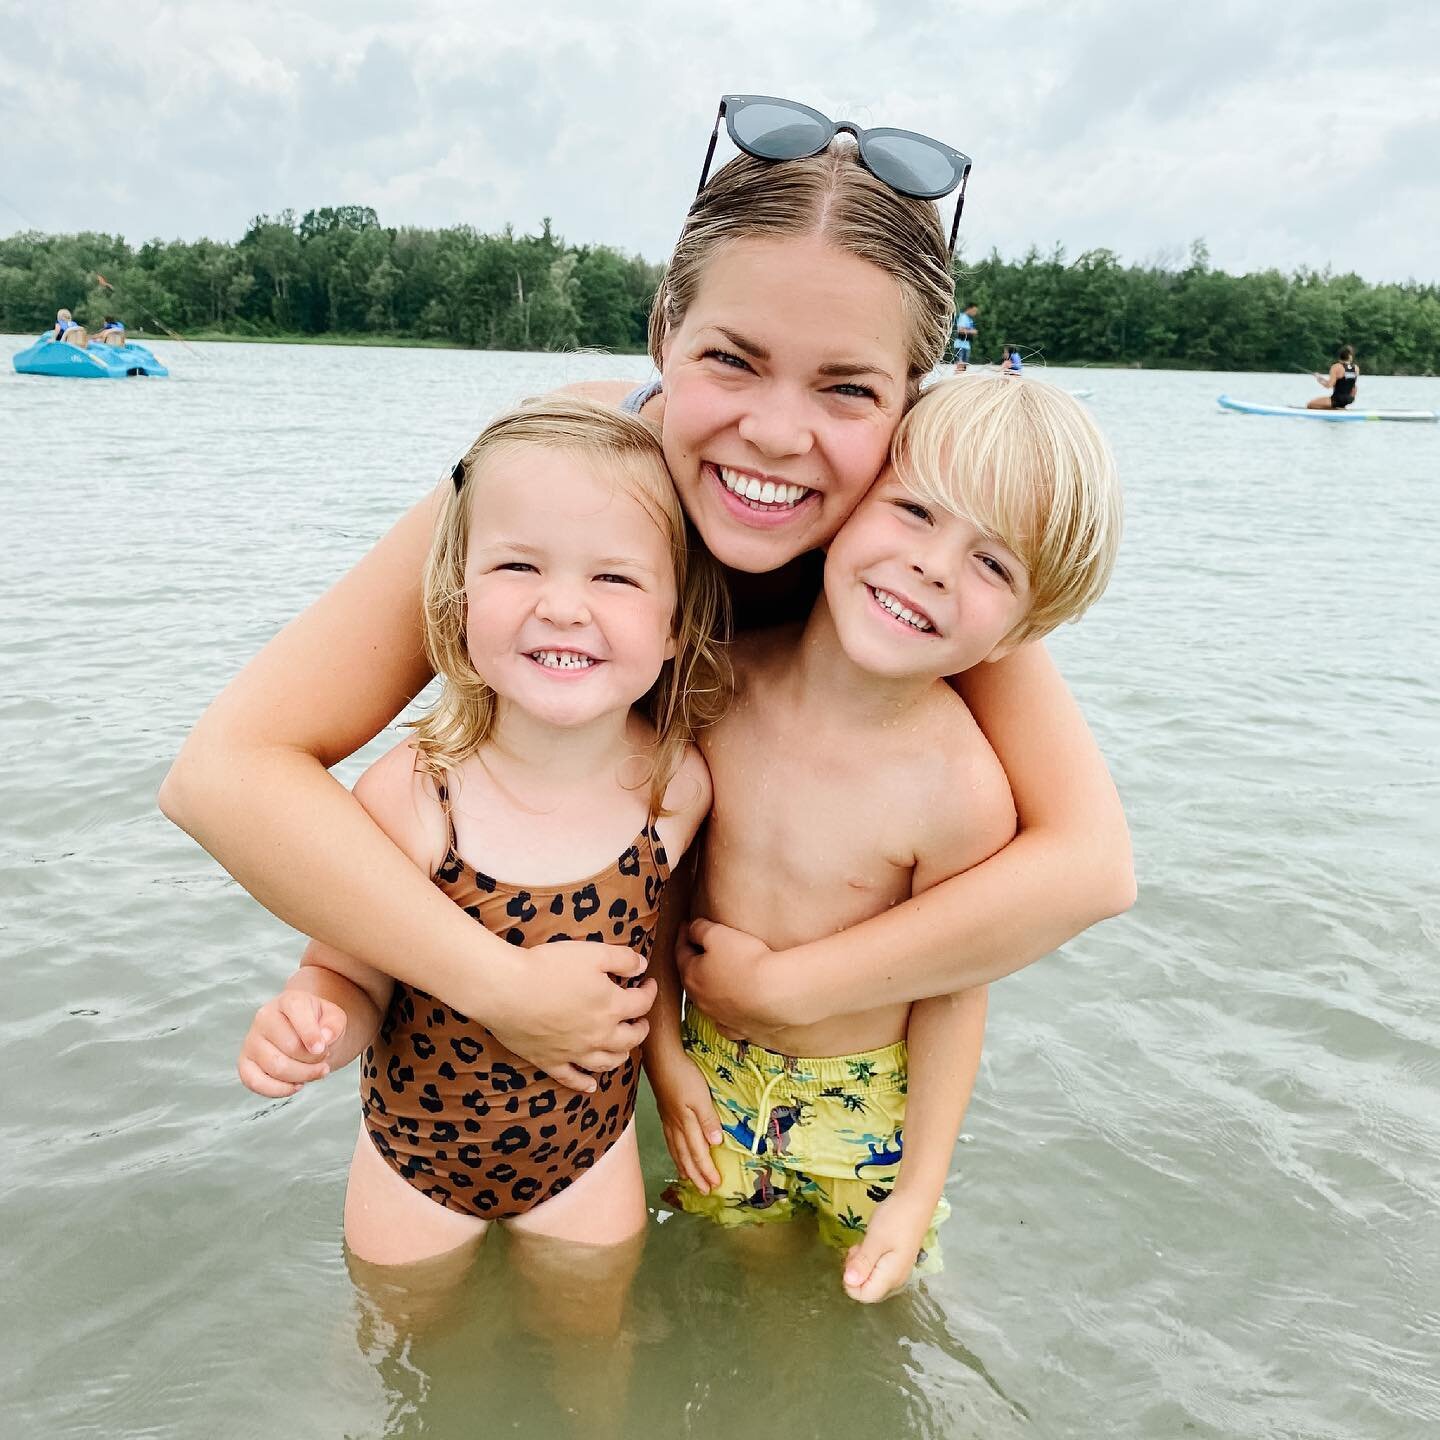 I have a birthmark on my right thigh. I always notice it when I slip on a swimsuit. Just the other day, as I helped my three-year-old niece step into her swimsuit, I noticed something. She has a birthmark&hellip; and it&rsquo;s identical to mine. It&